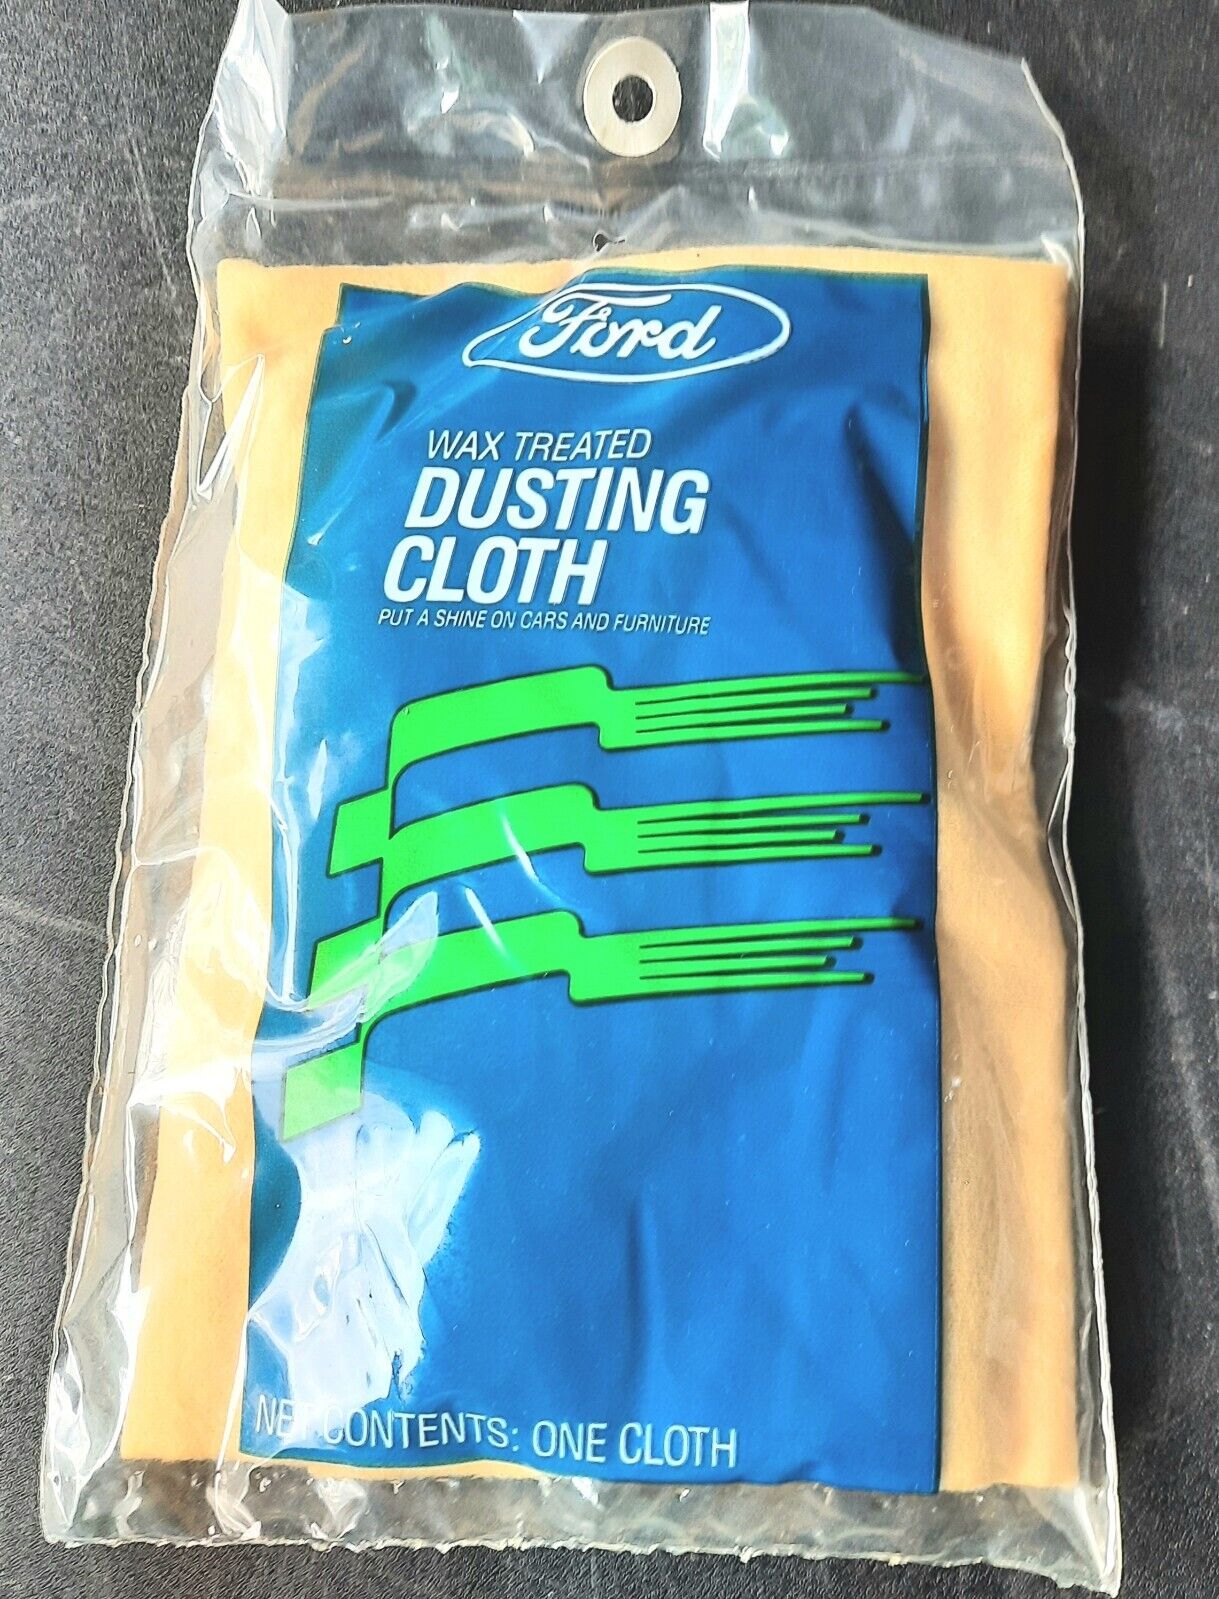 NOS Vintage FORD Wax Treated Dusting Cloth  73- 24  MUSTANG SHELBY TORINO BRONCO